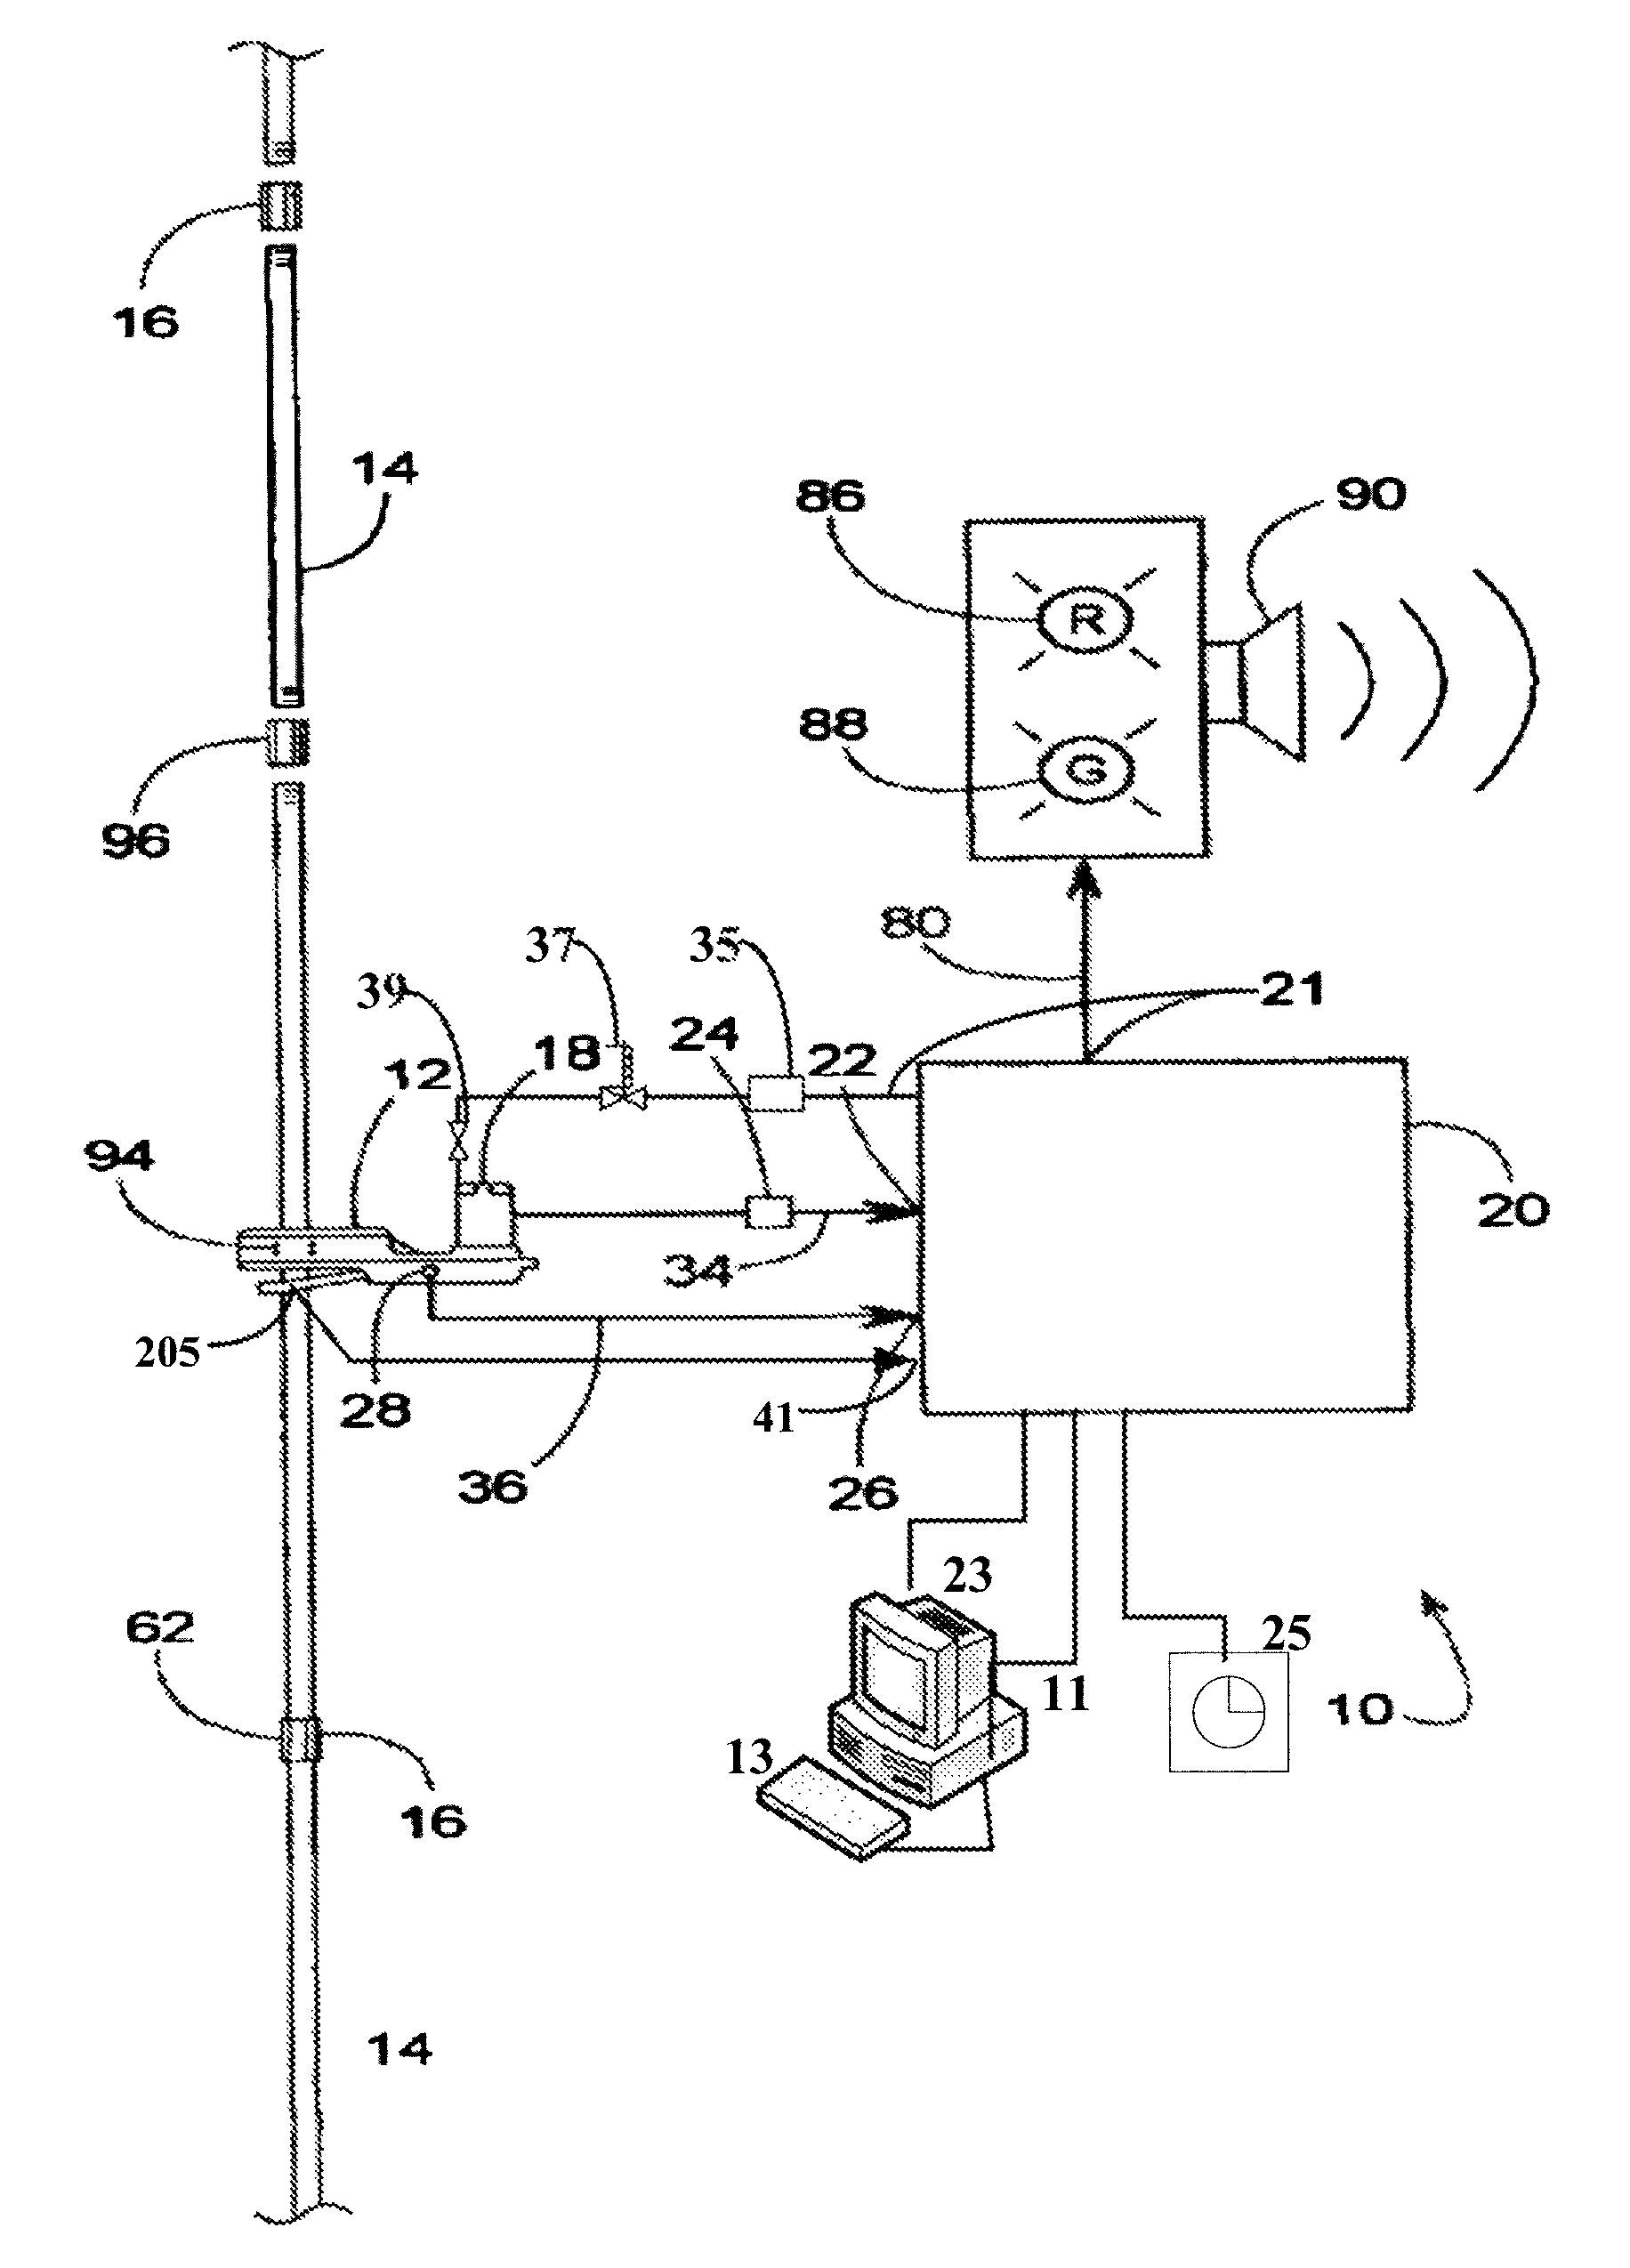 Method and system for monitoring the efficiency and health of a hydraulically driven system